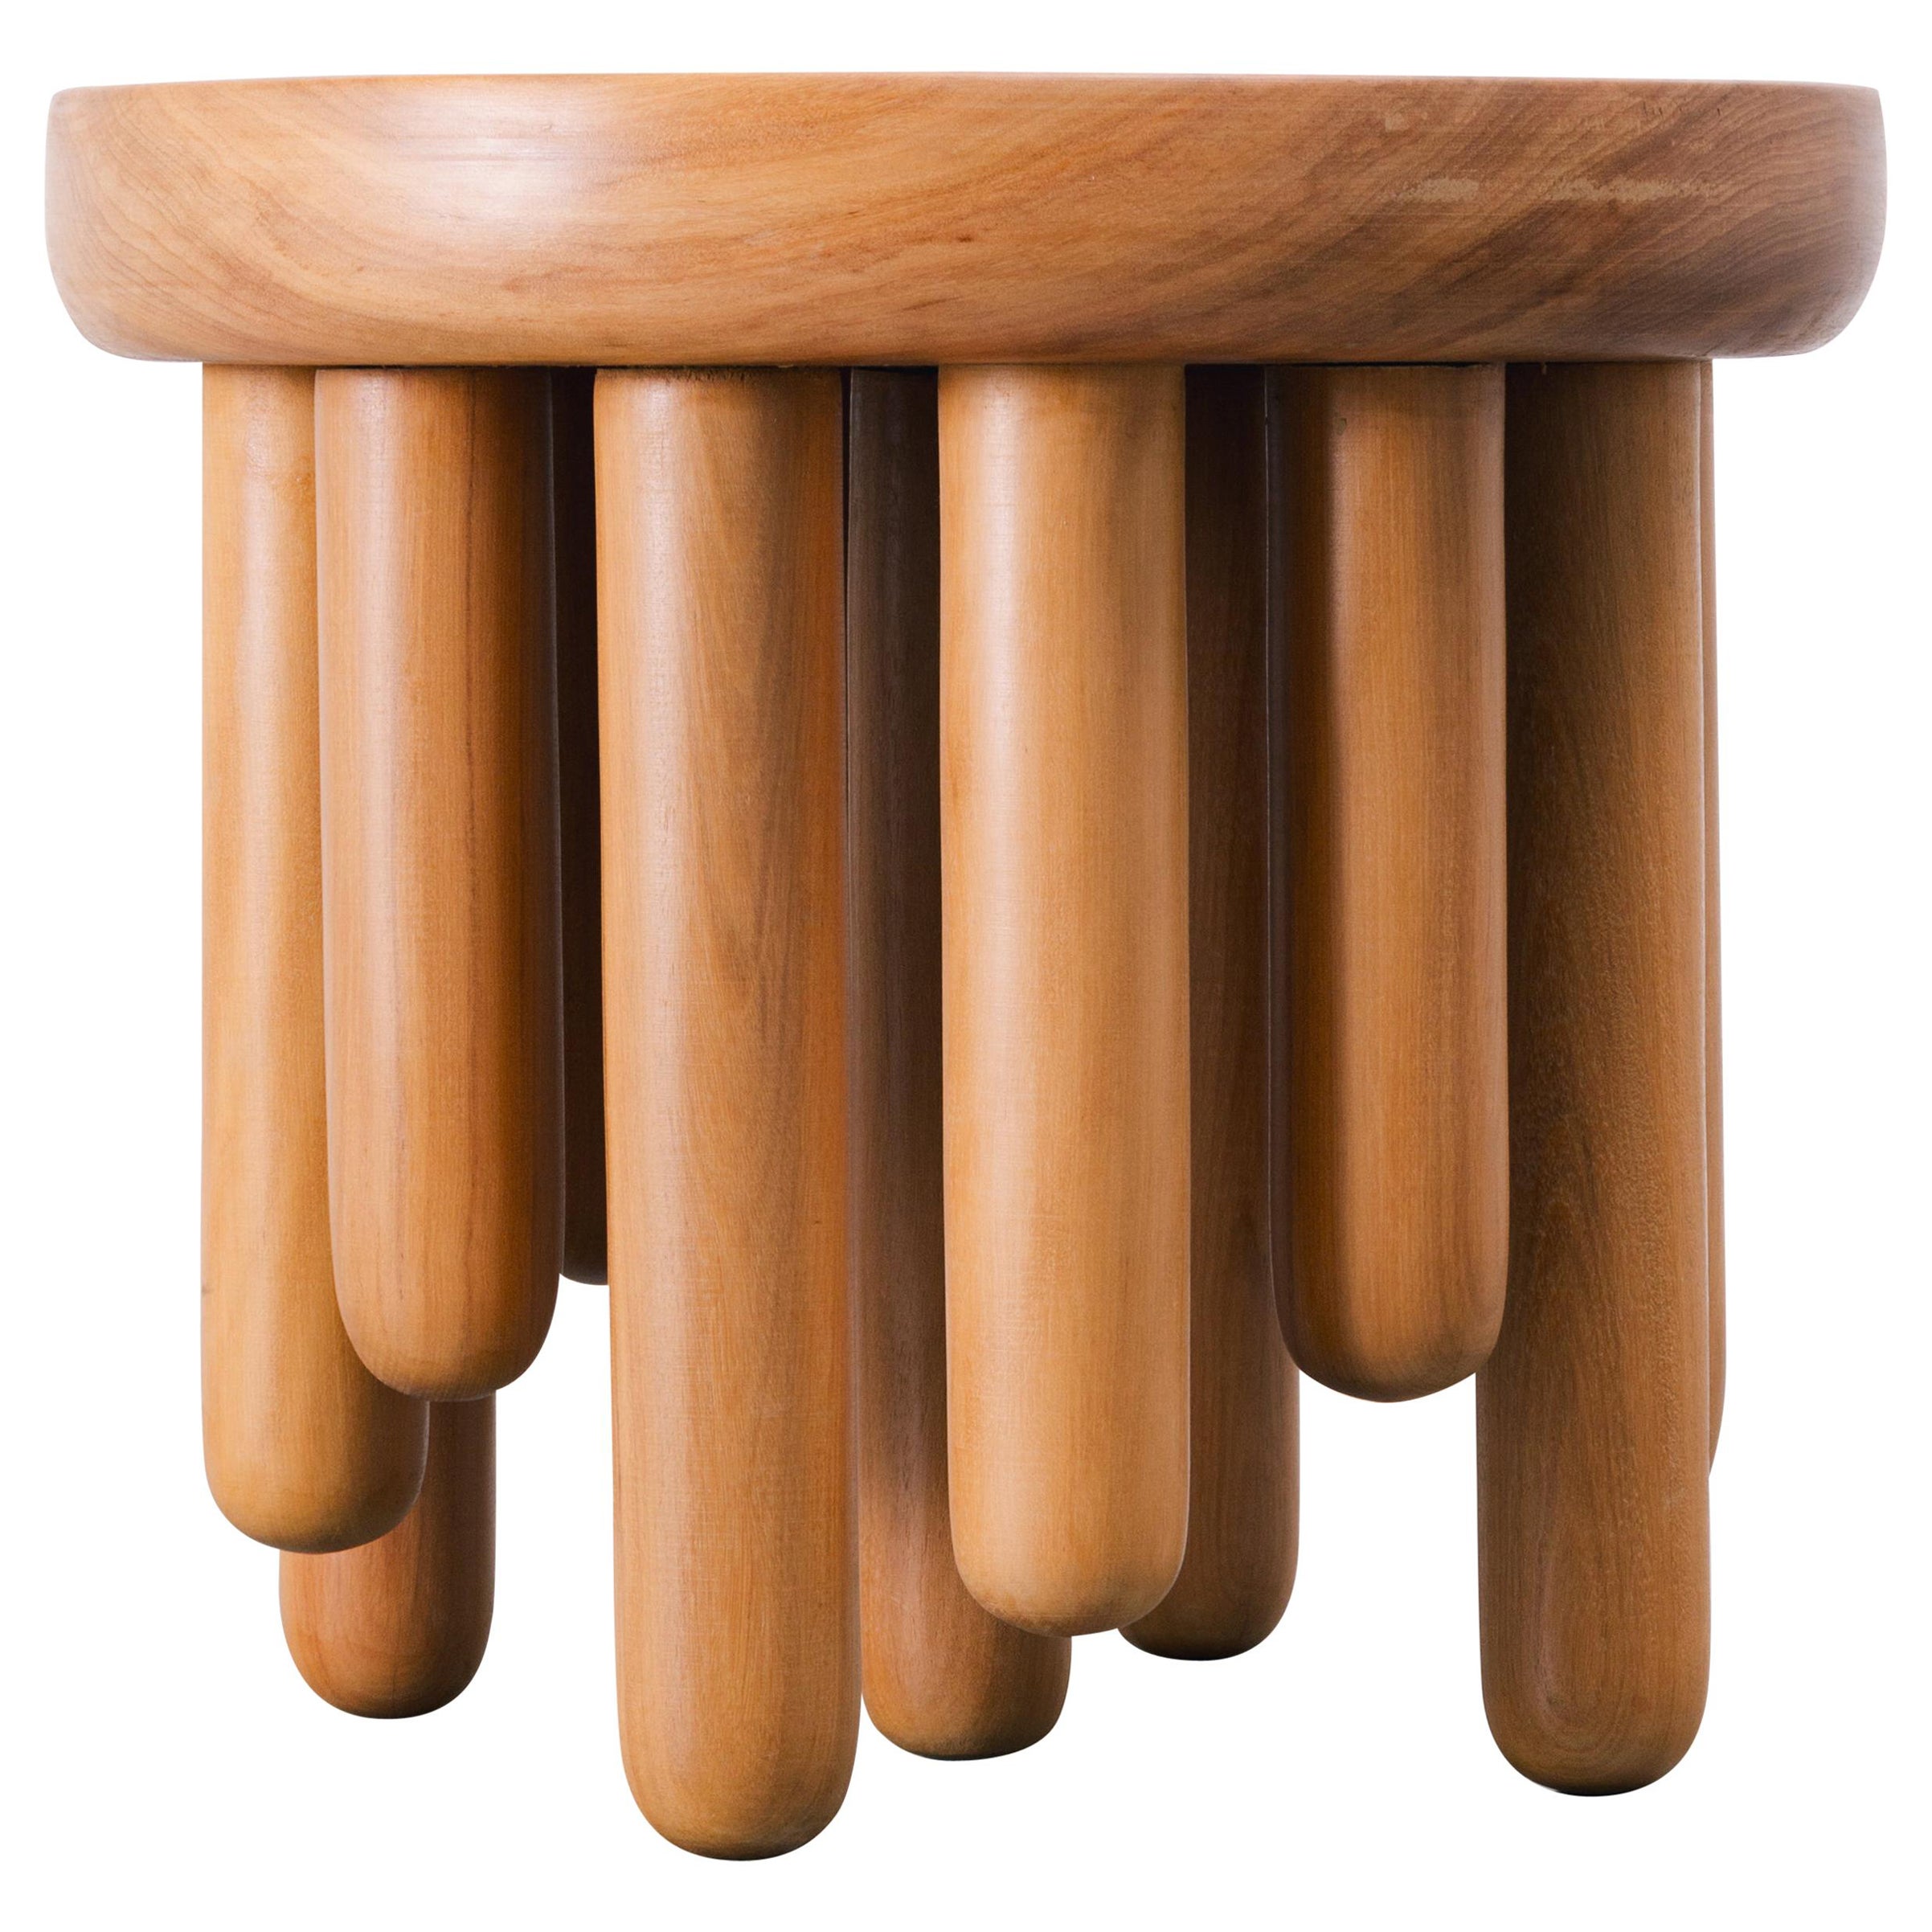 Benta Collection, Contemporary Angelim Wooden Stool